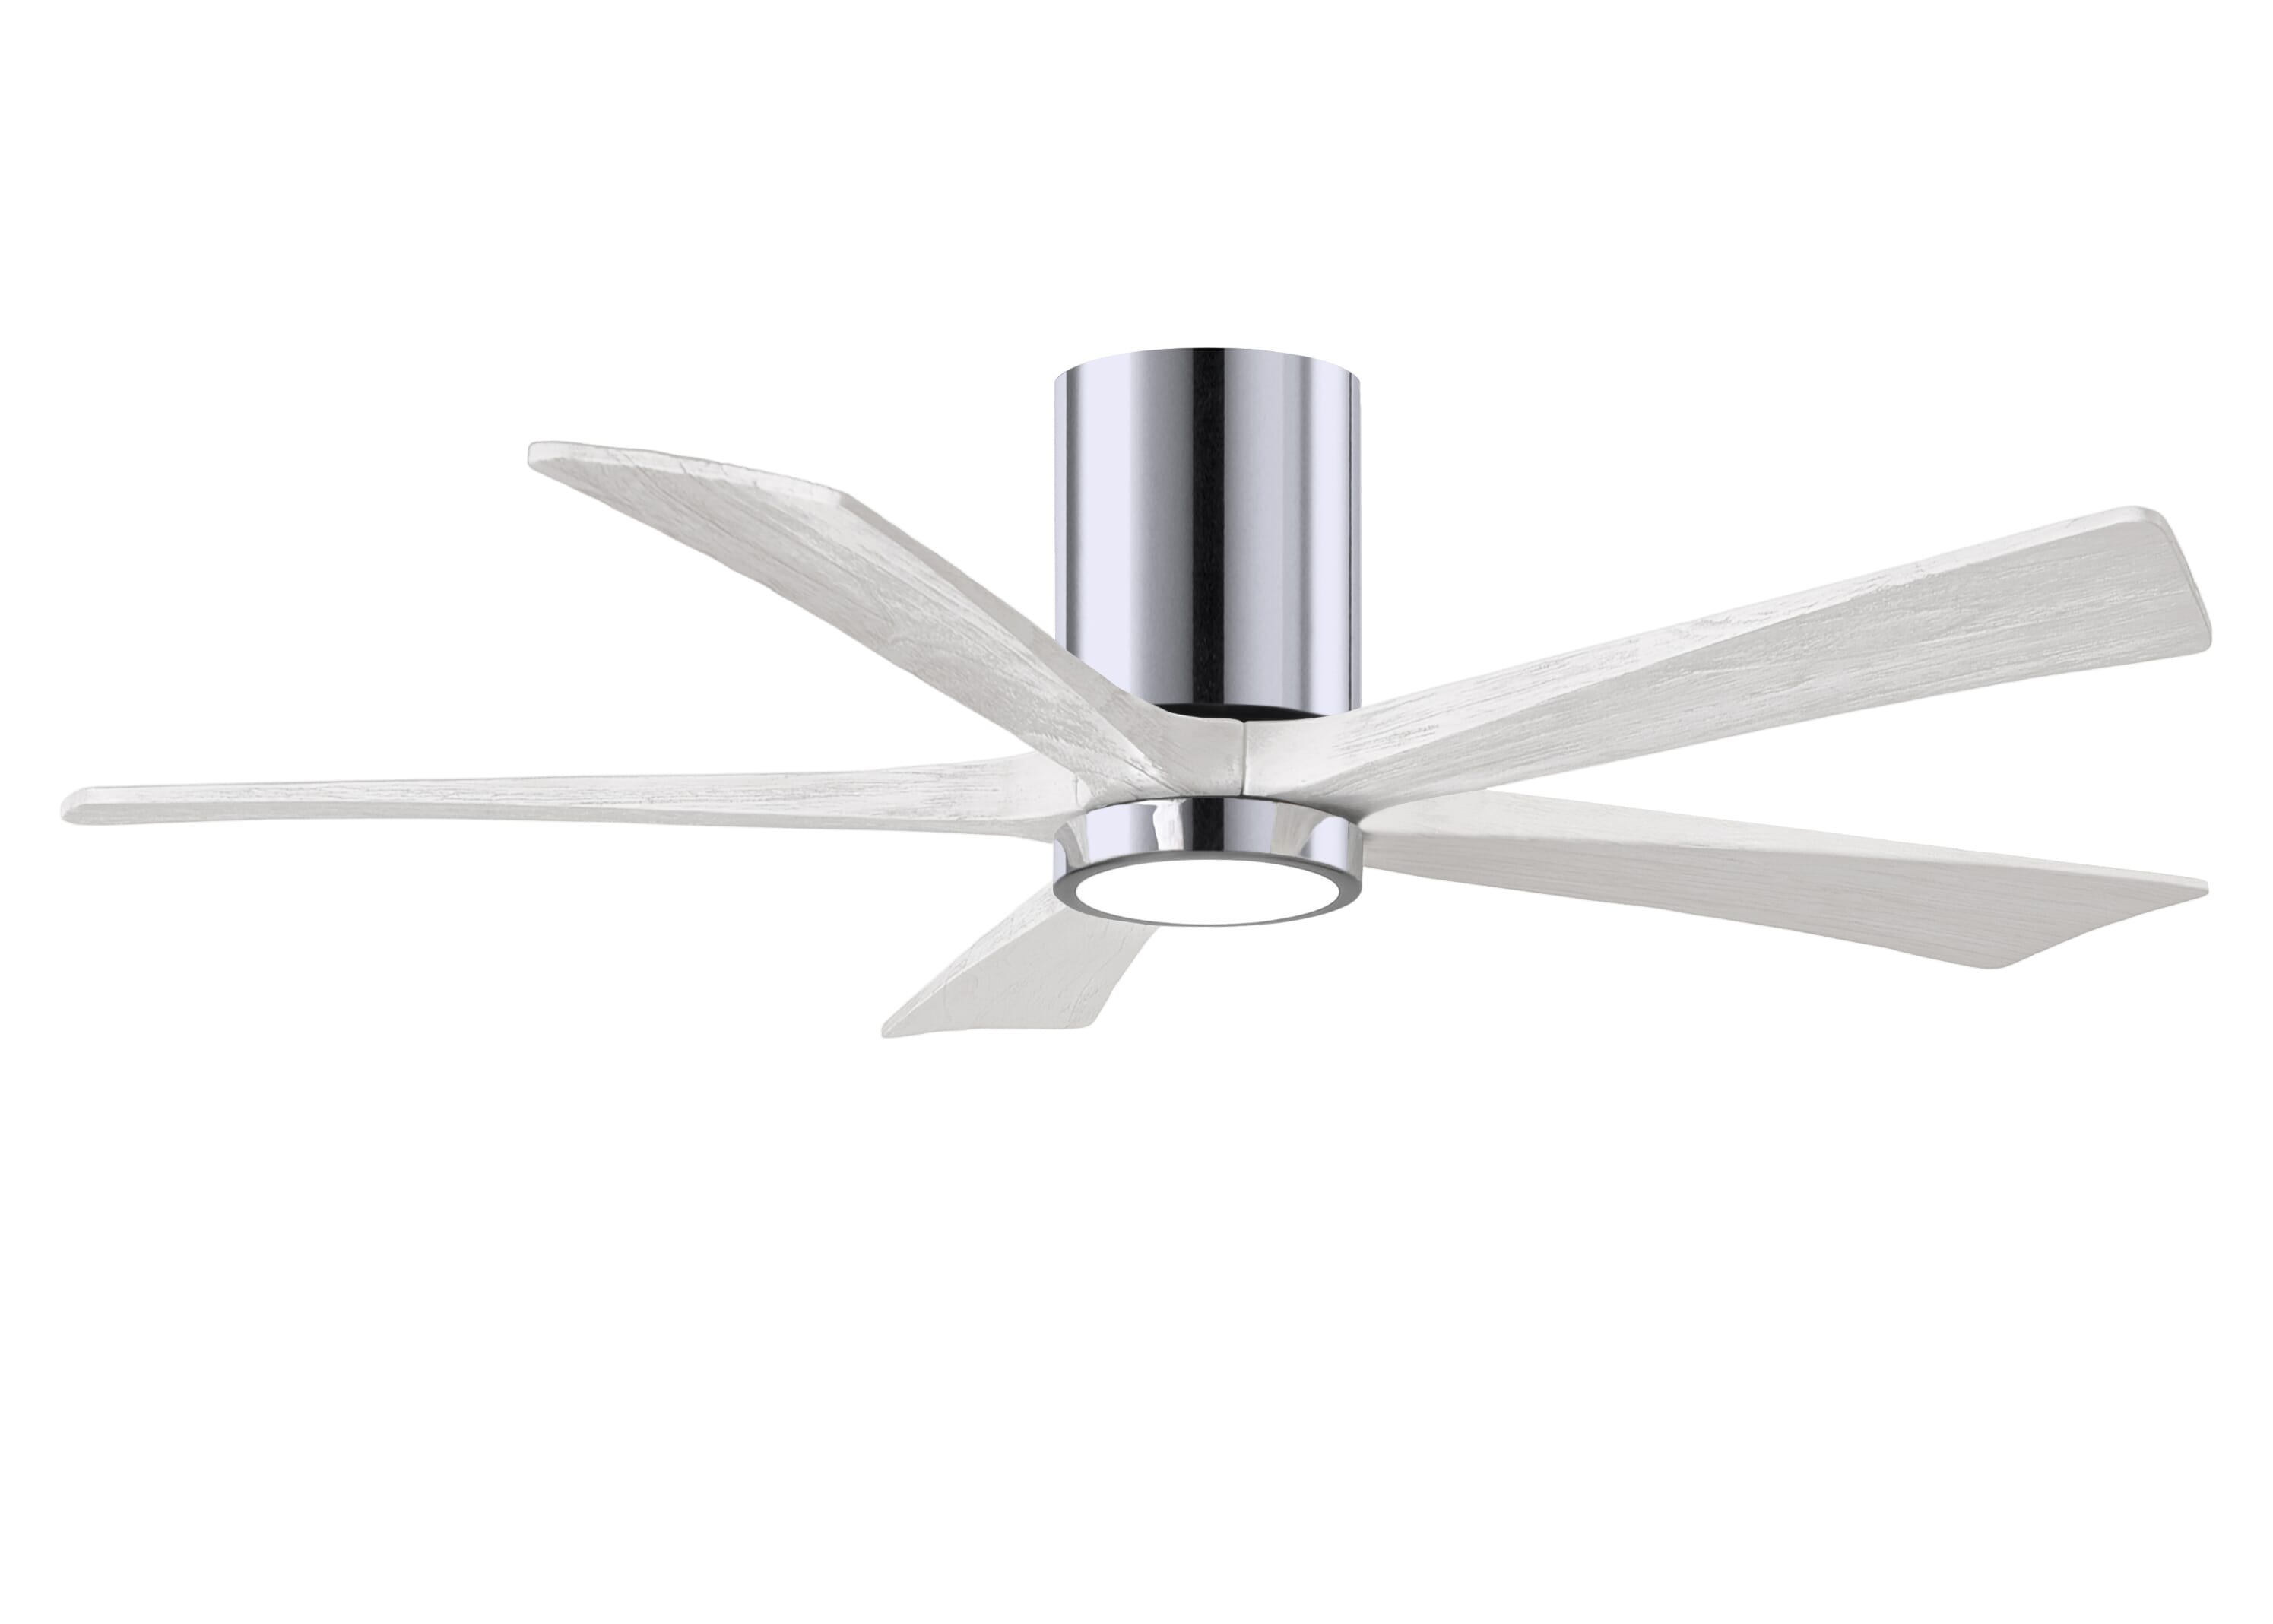 Irene 6-Speed DC 52"" Ceiling Fan w/ Integrated Light Kit in Polished Chrome with Matte White blades -  Matthews Fan Company, IR5HLK-CR-MWH-52